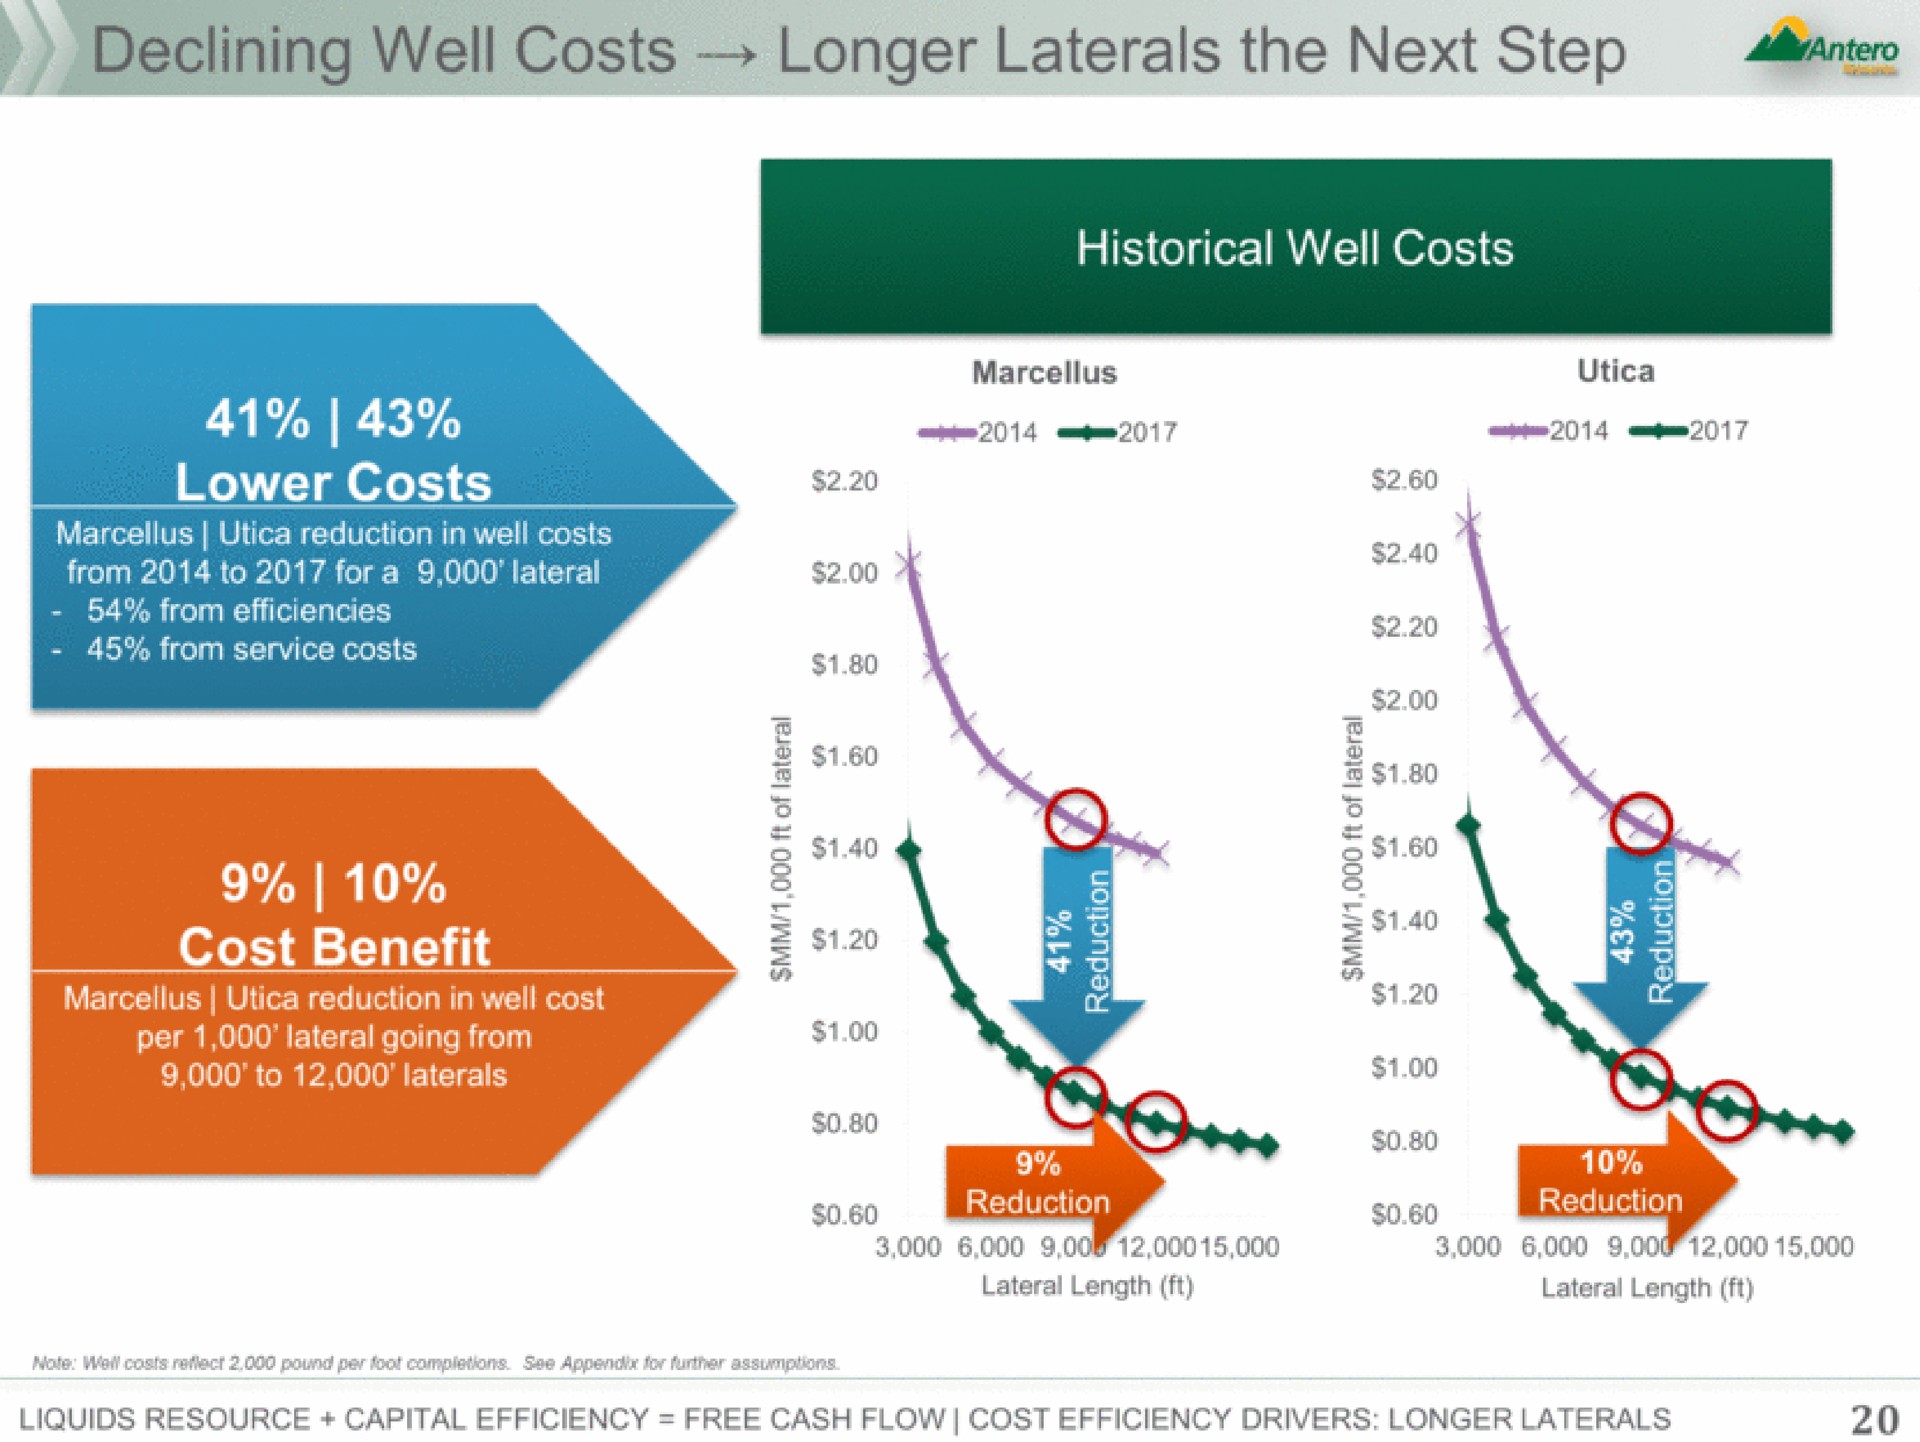 lower costs cost benefit a ate | Antero Midstream Partners